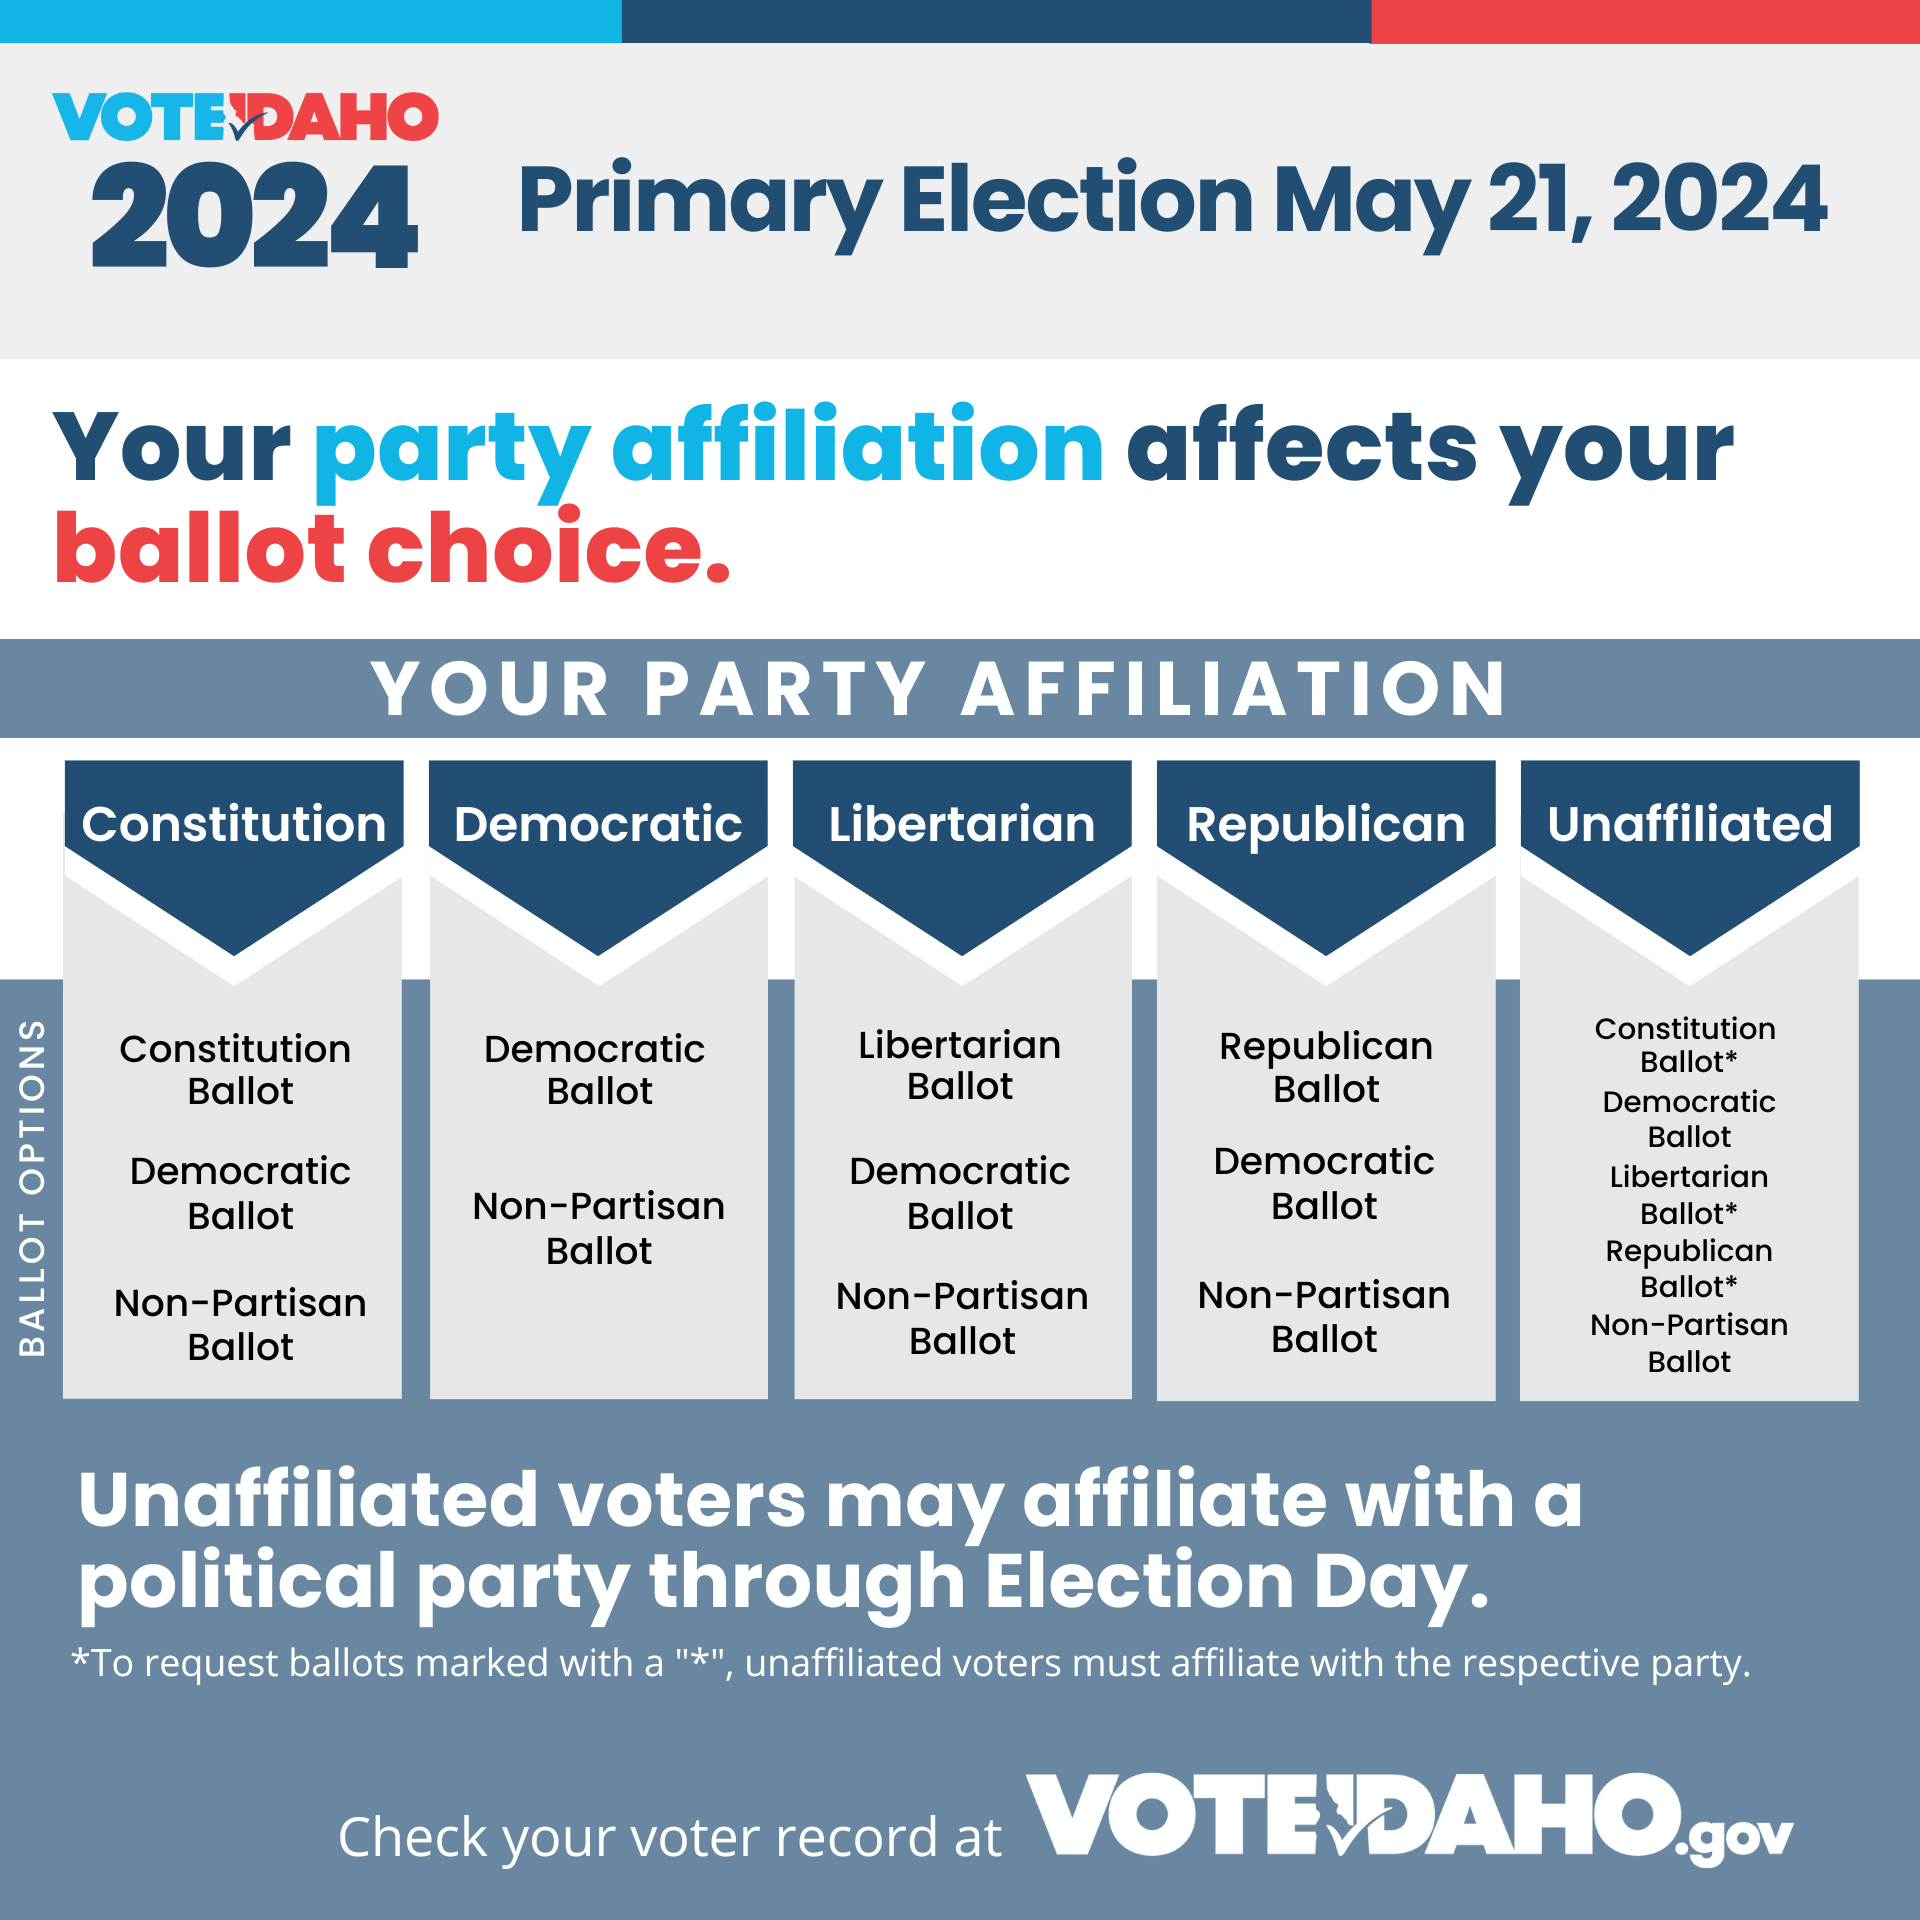 Primary Election May 21, 2024 Your Party Affiliation affects your ballot choice.